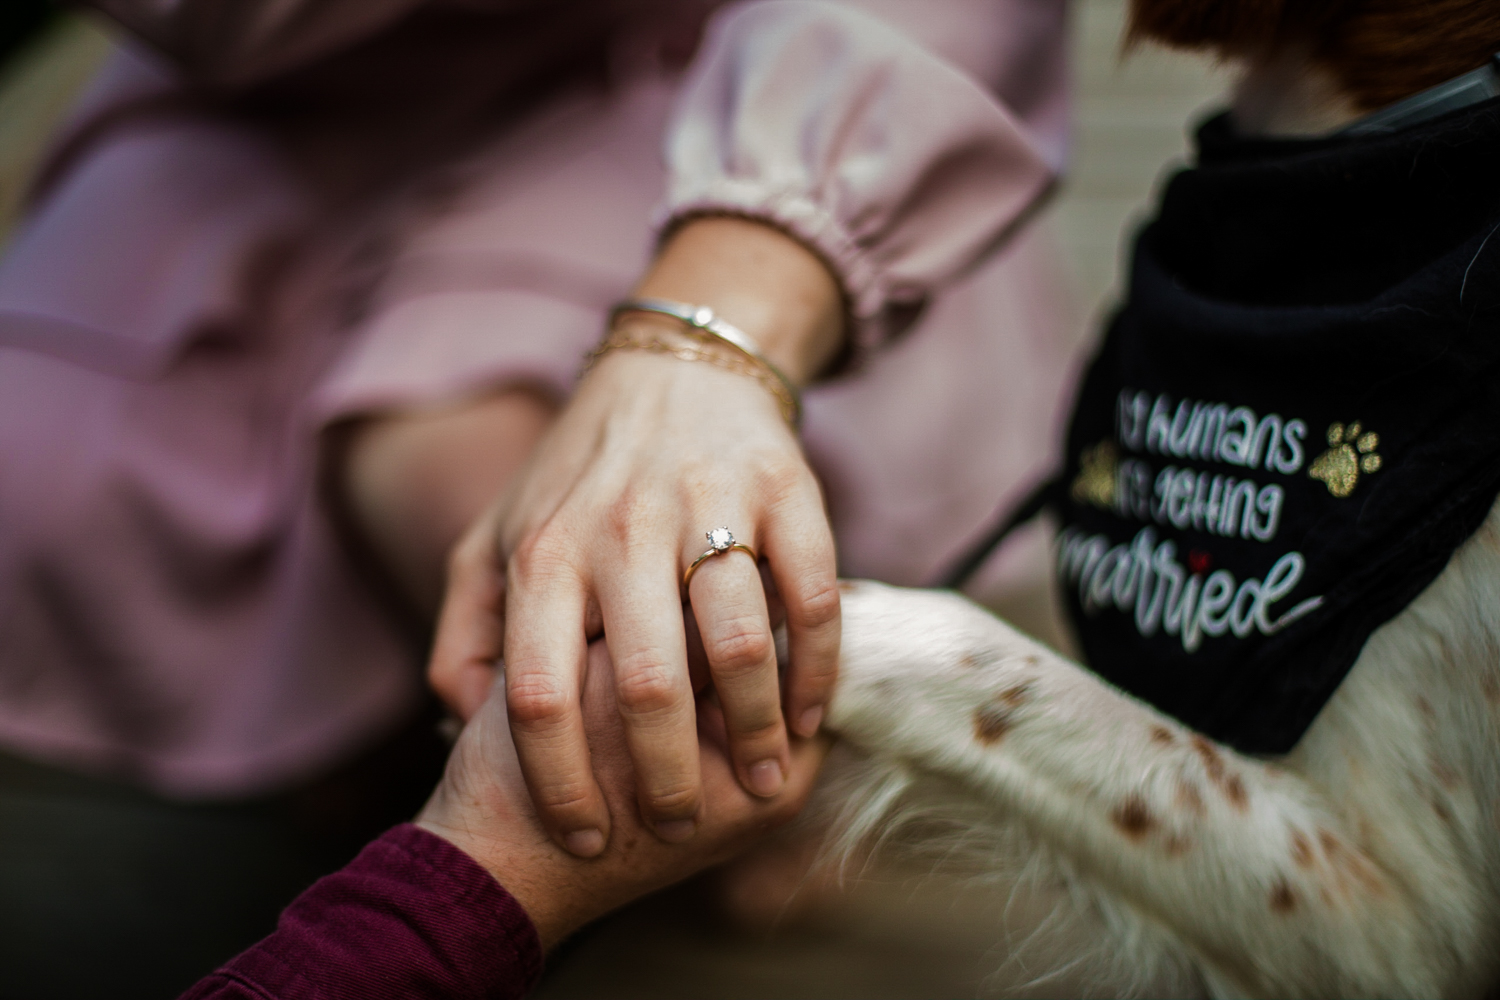 Man, woman and their dog hold holds with woman's engagement ring as focus